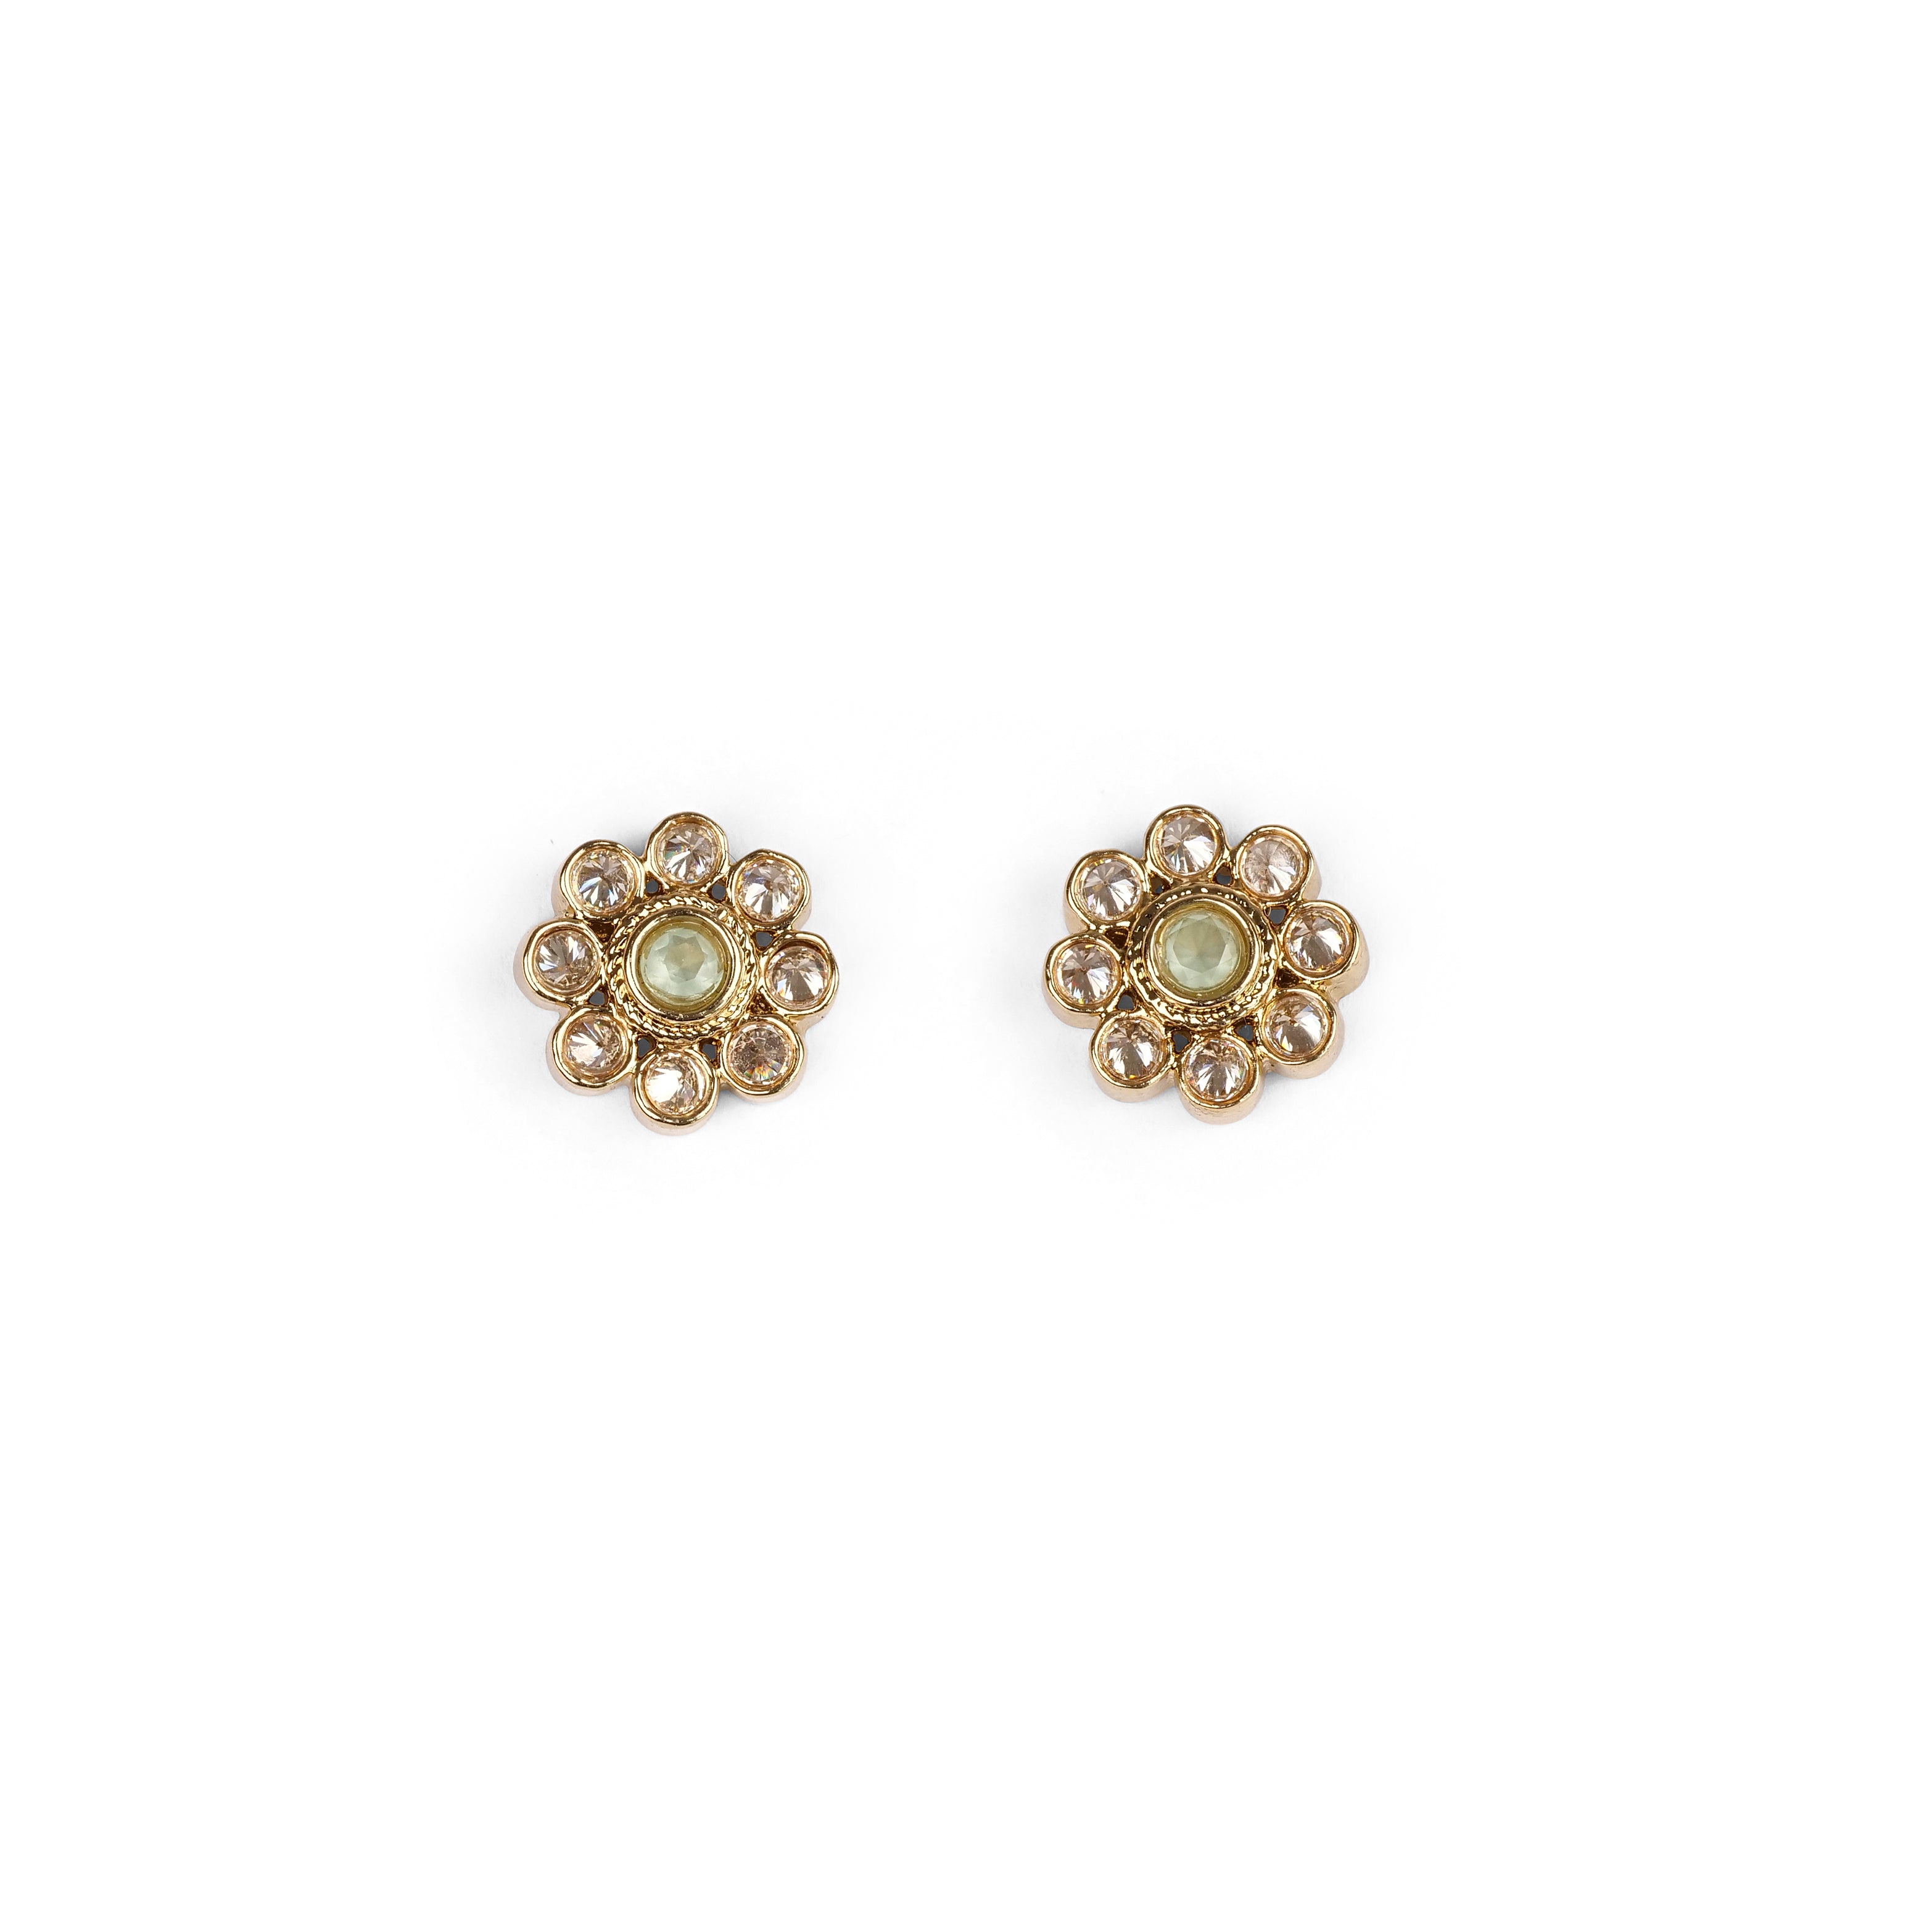 Frida Floral Earstuds in Mint